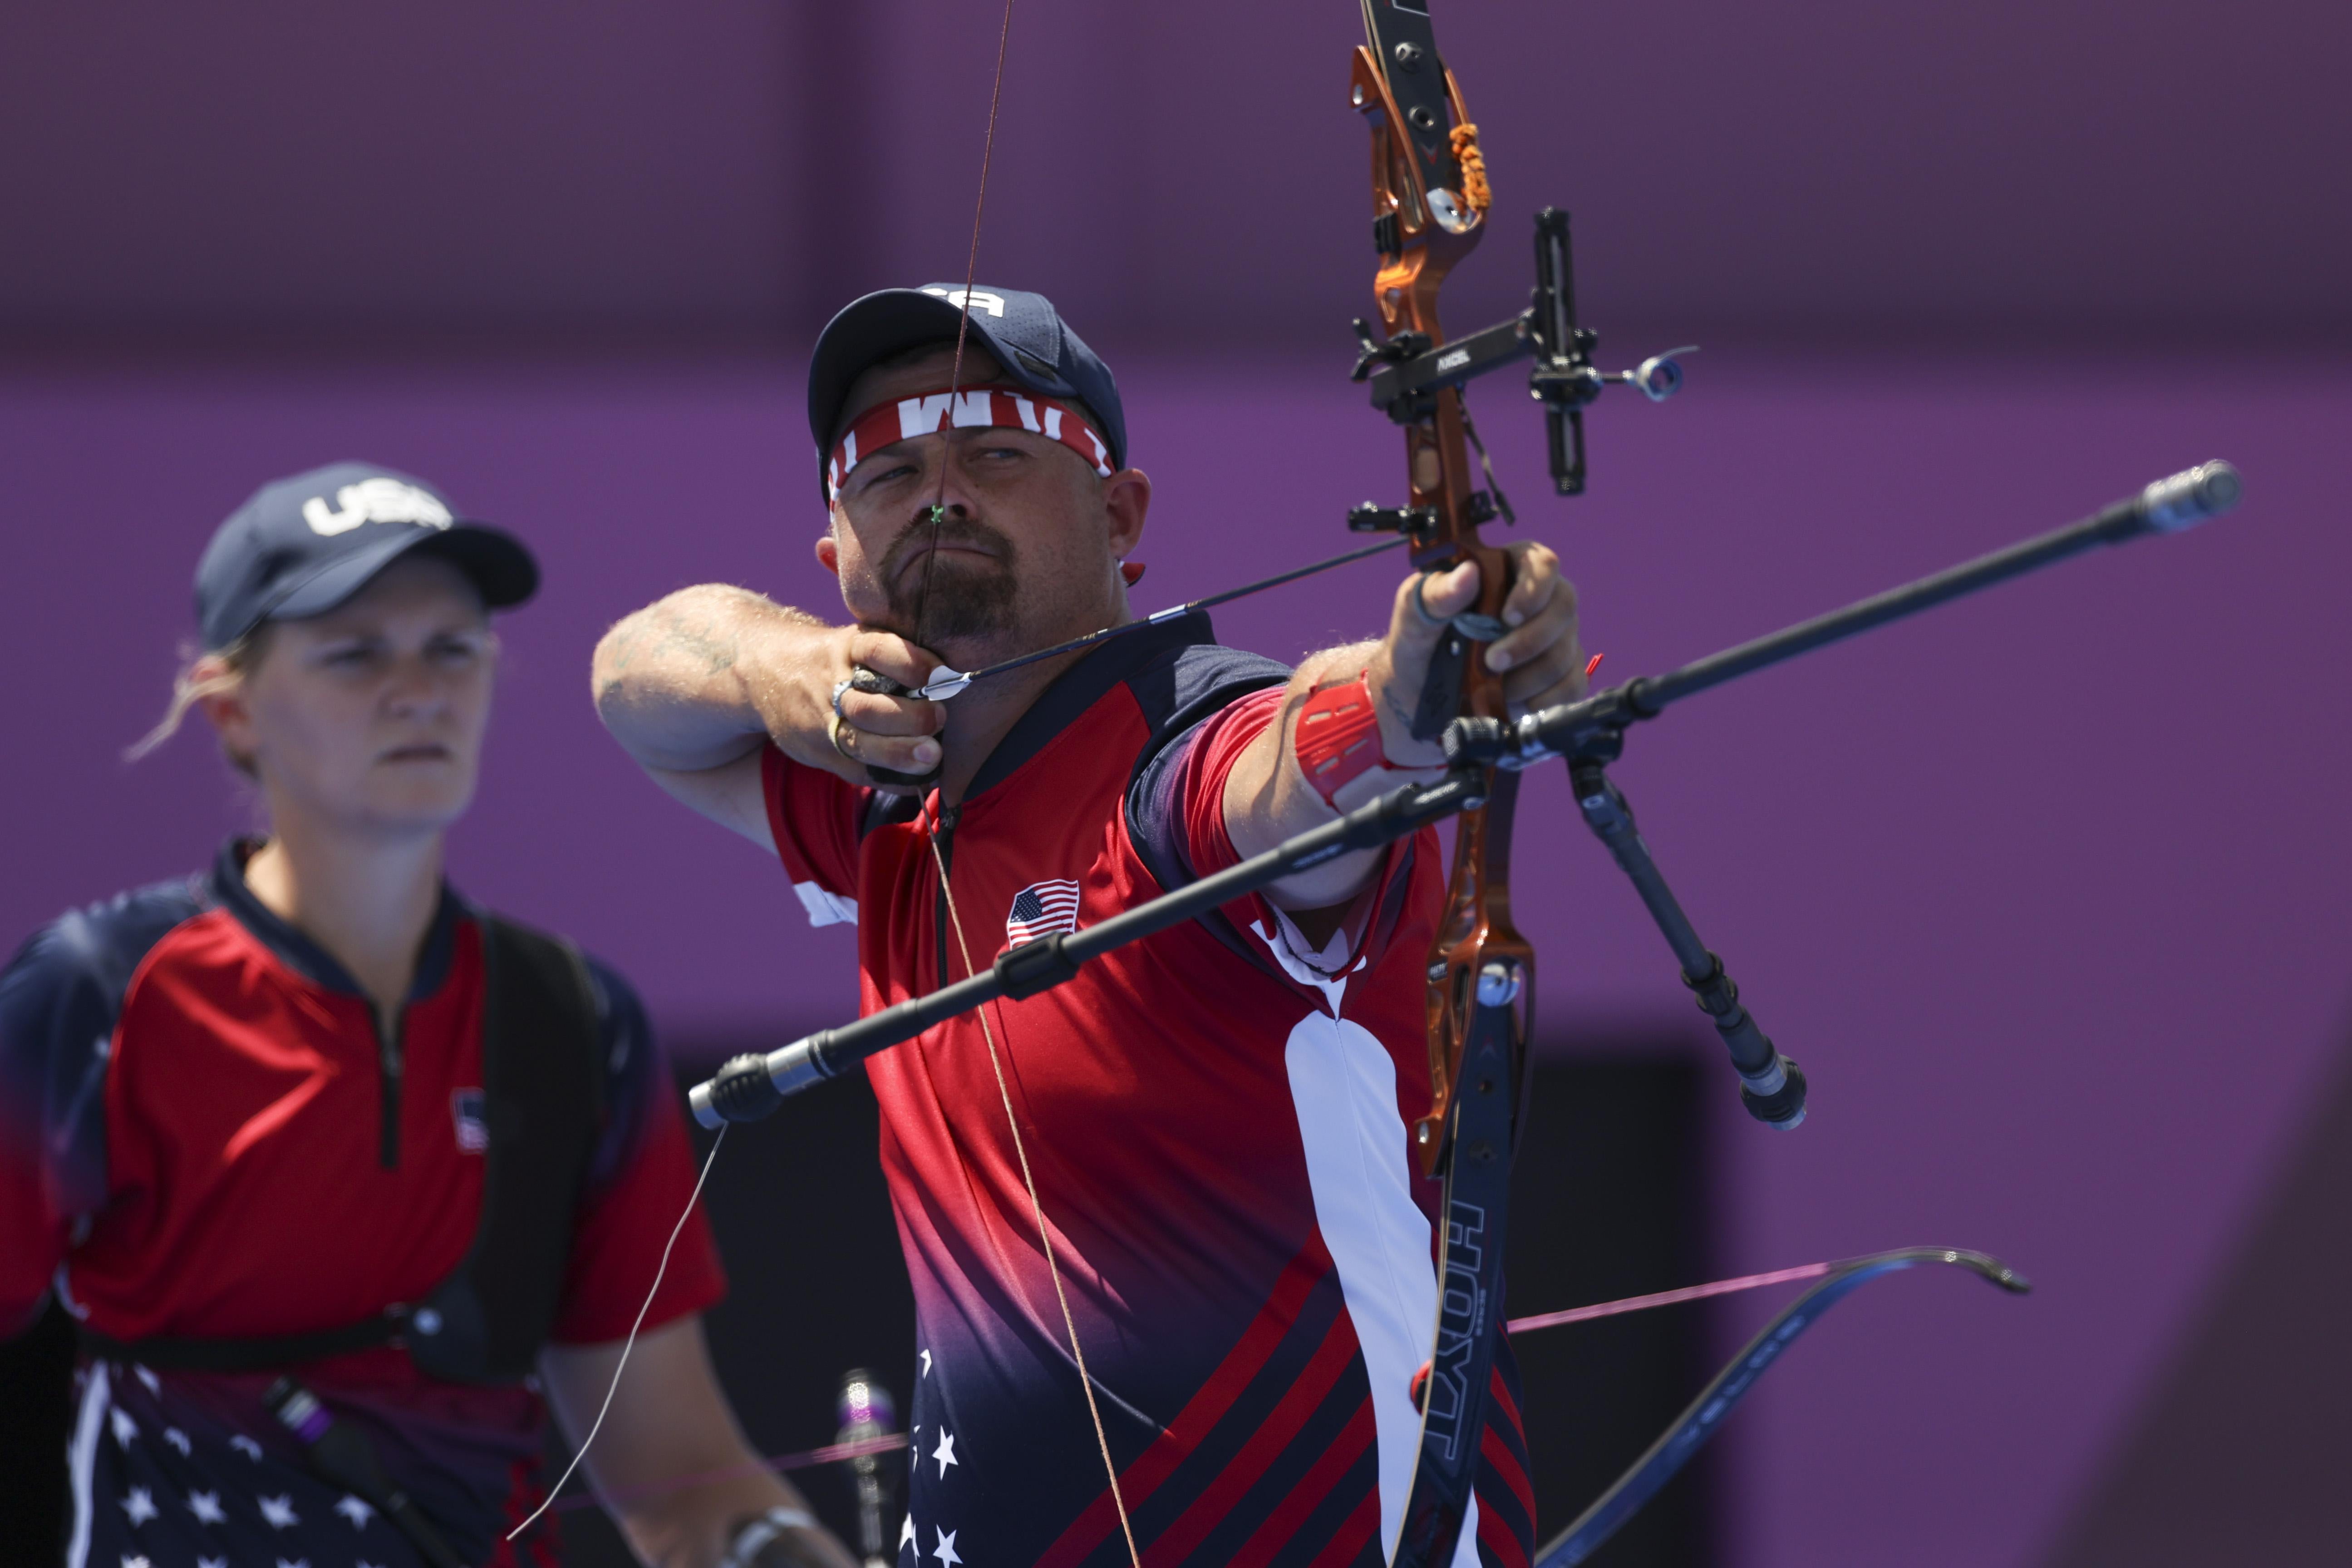 Brady Ellison of Team United States competes in the Mixed Team 1/8 Eliminations on day one of the Tokyo 2020 Olympic Games at Yumenoshima Park Archery Field on July 24, 2021 in Tokyo, Japan.